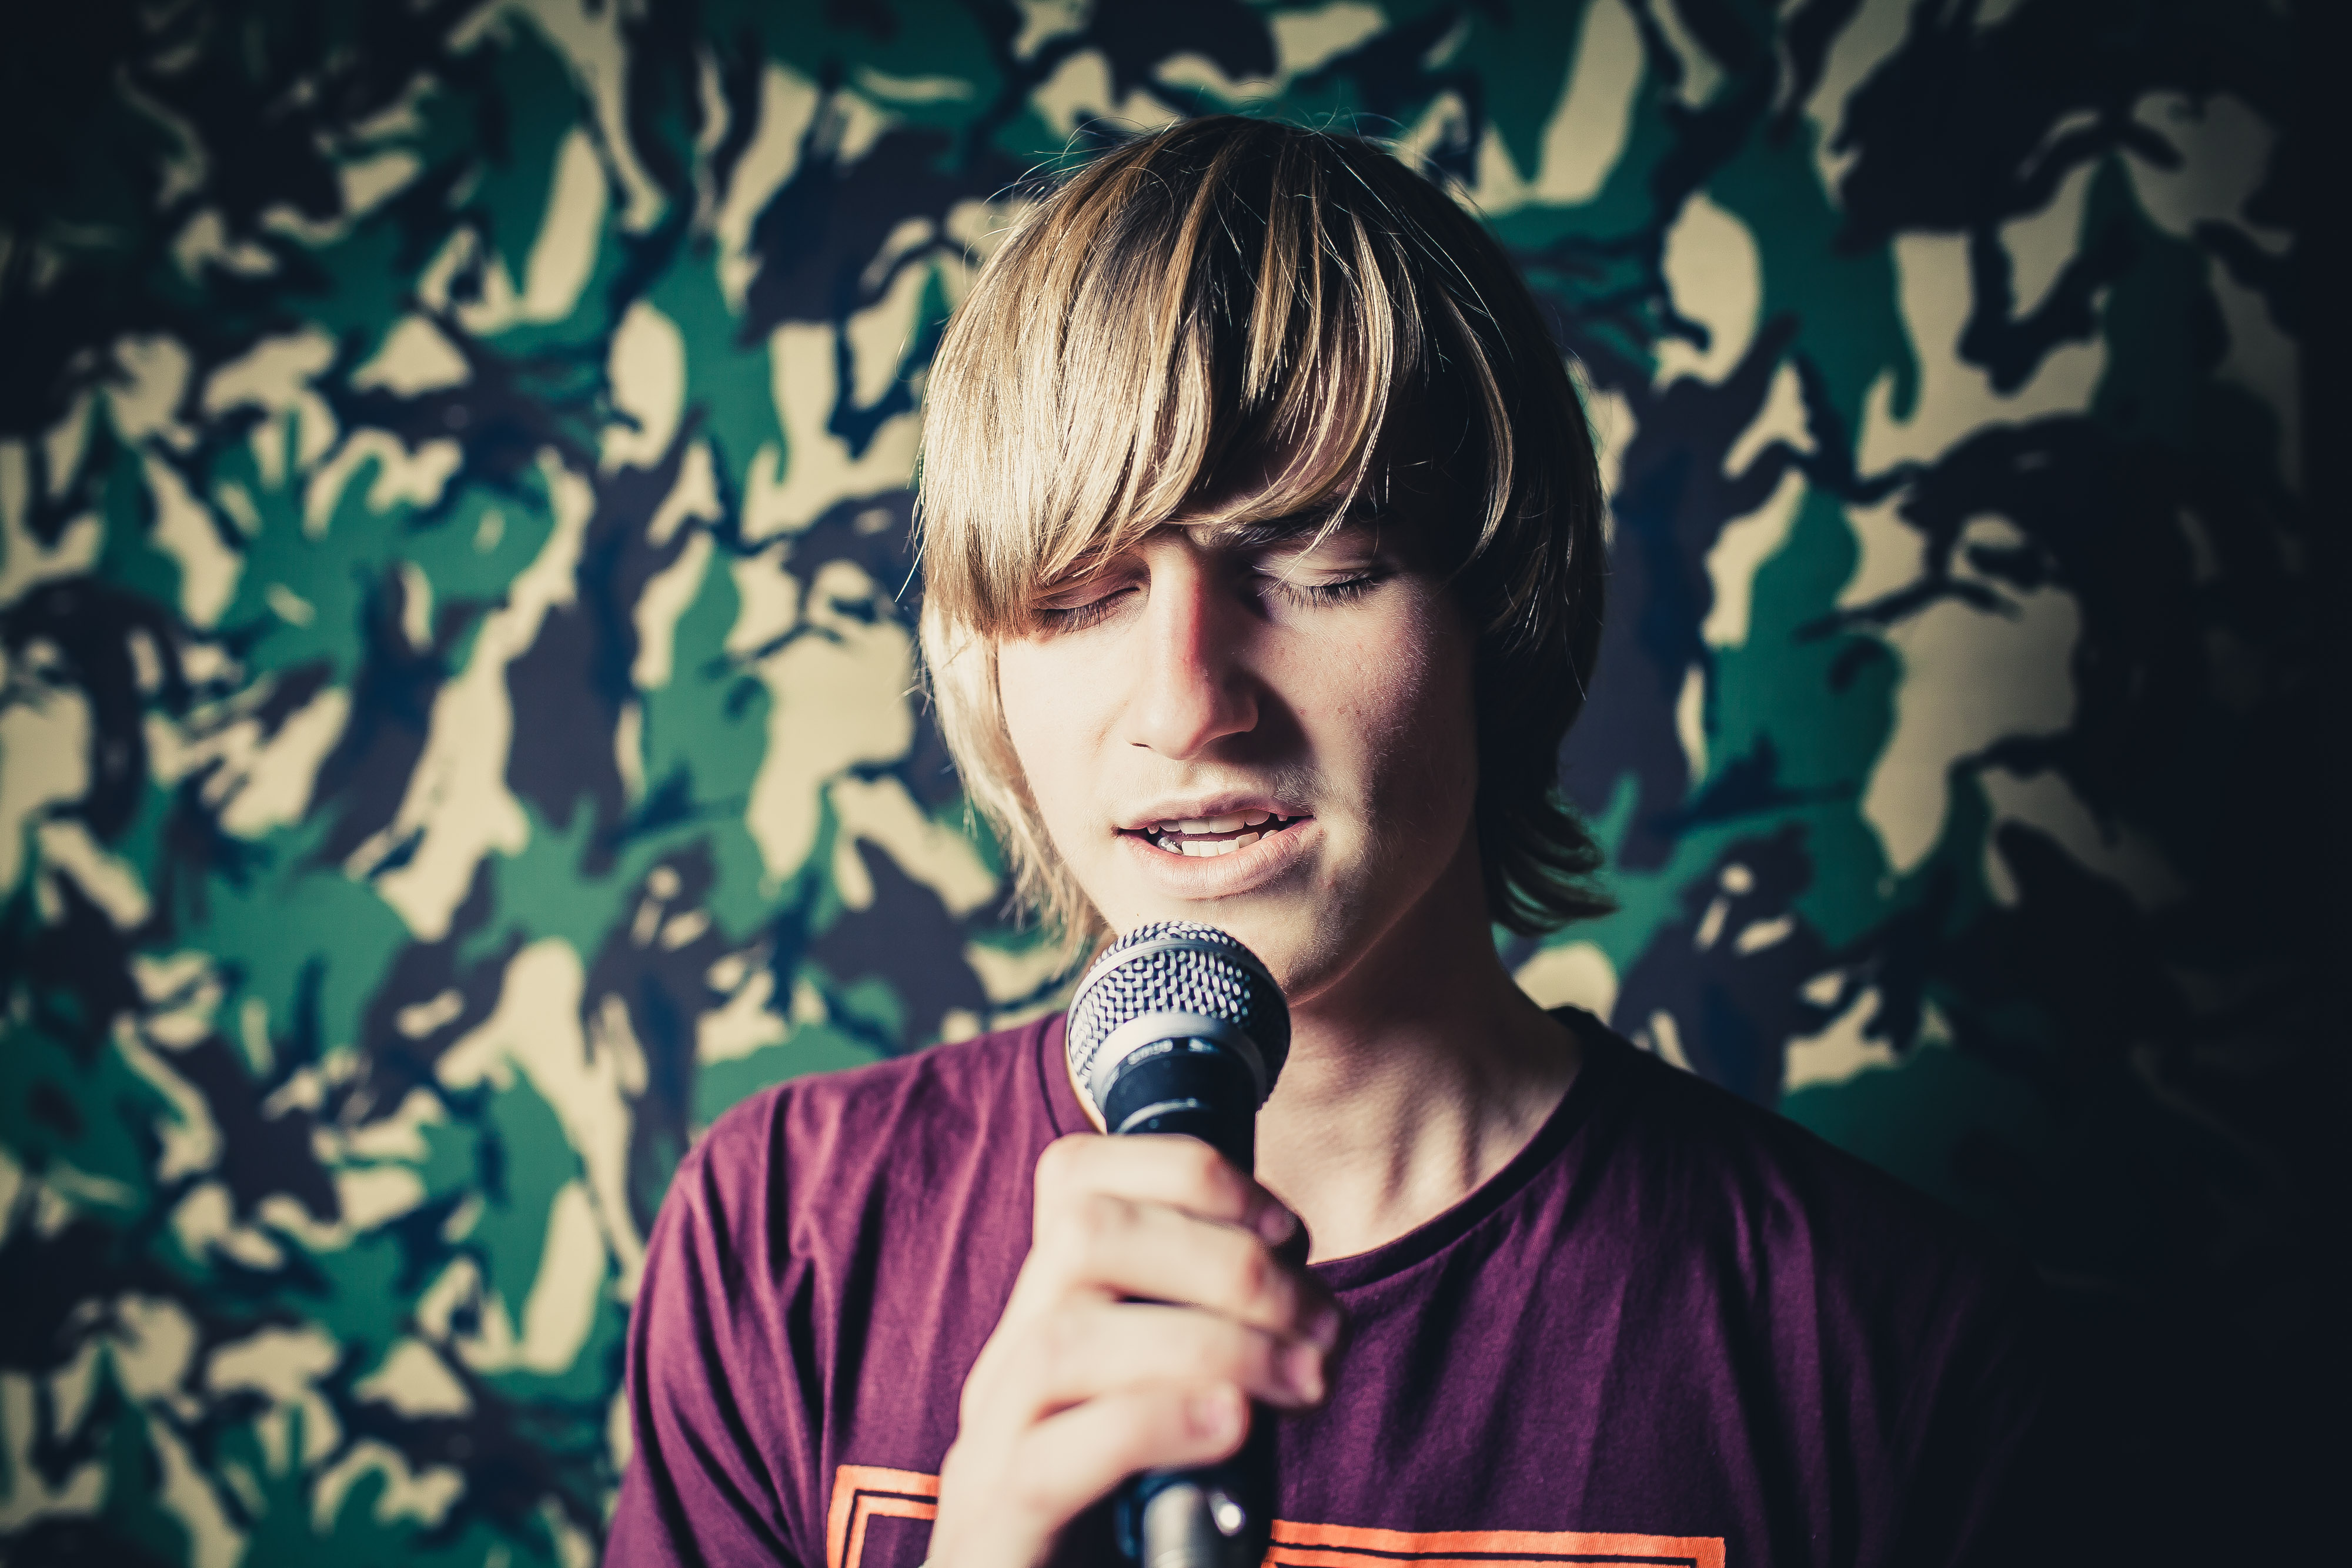 Young man with blonde hair singing into a microphone